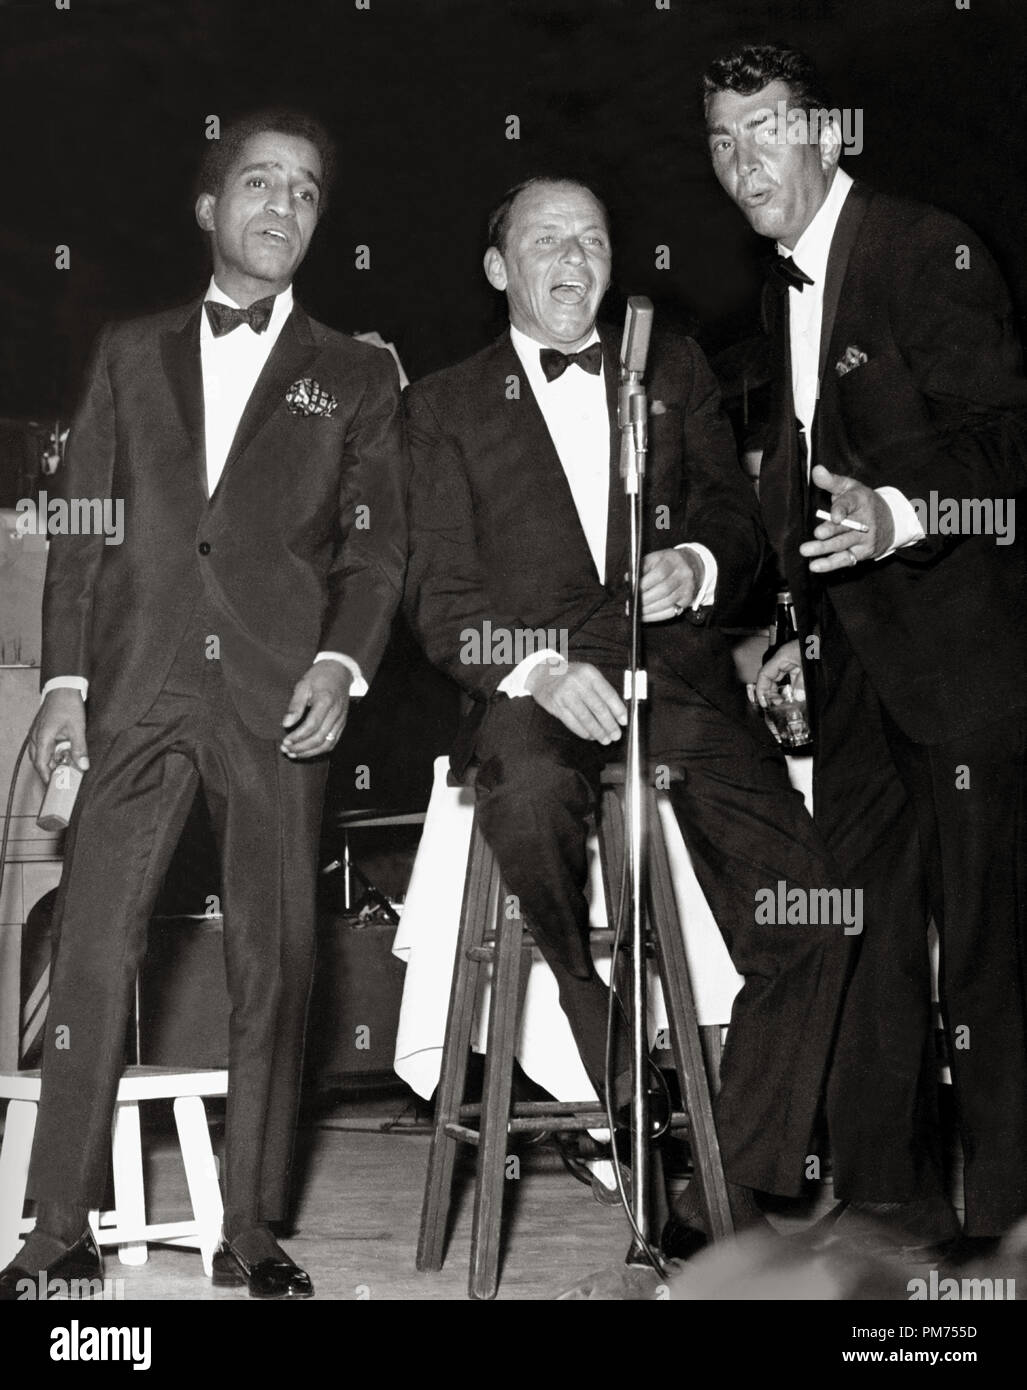 Members of the Rat Pack, Sammy Davis Jr., Frank Sinatra and Dean Martin performing, circa 1961. File Reference # 30928 352THA Stock Photo